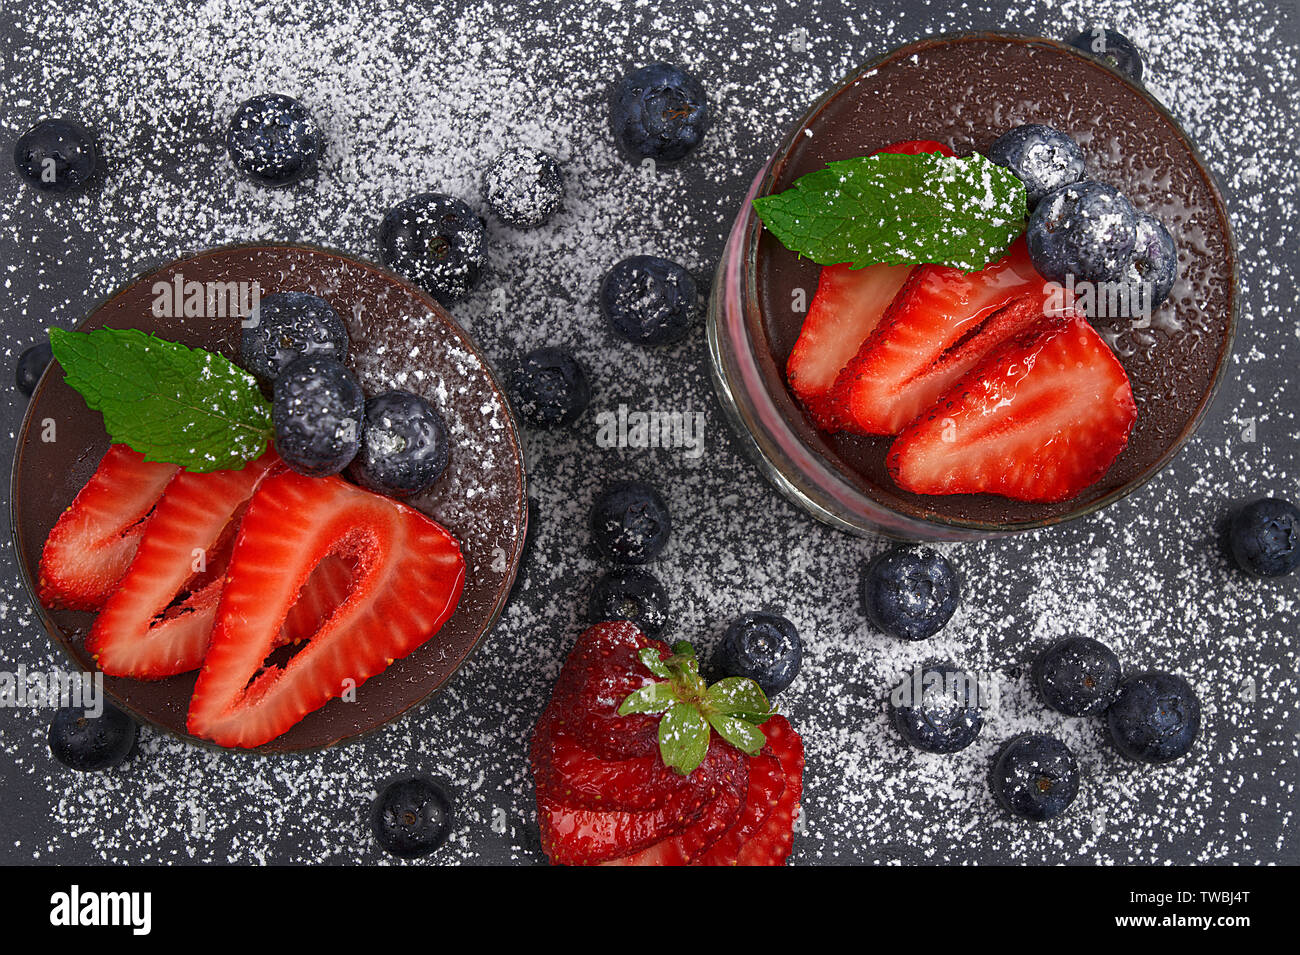 Cherry mousse with crumbled biscuit, cherries in syrup, pineapple cream and chocolate. Decorated with strawberries, blueberries and mint leaves Stock Photo